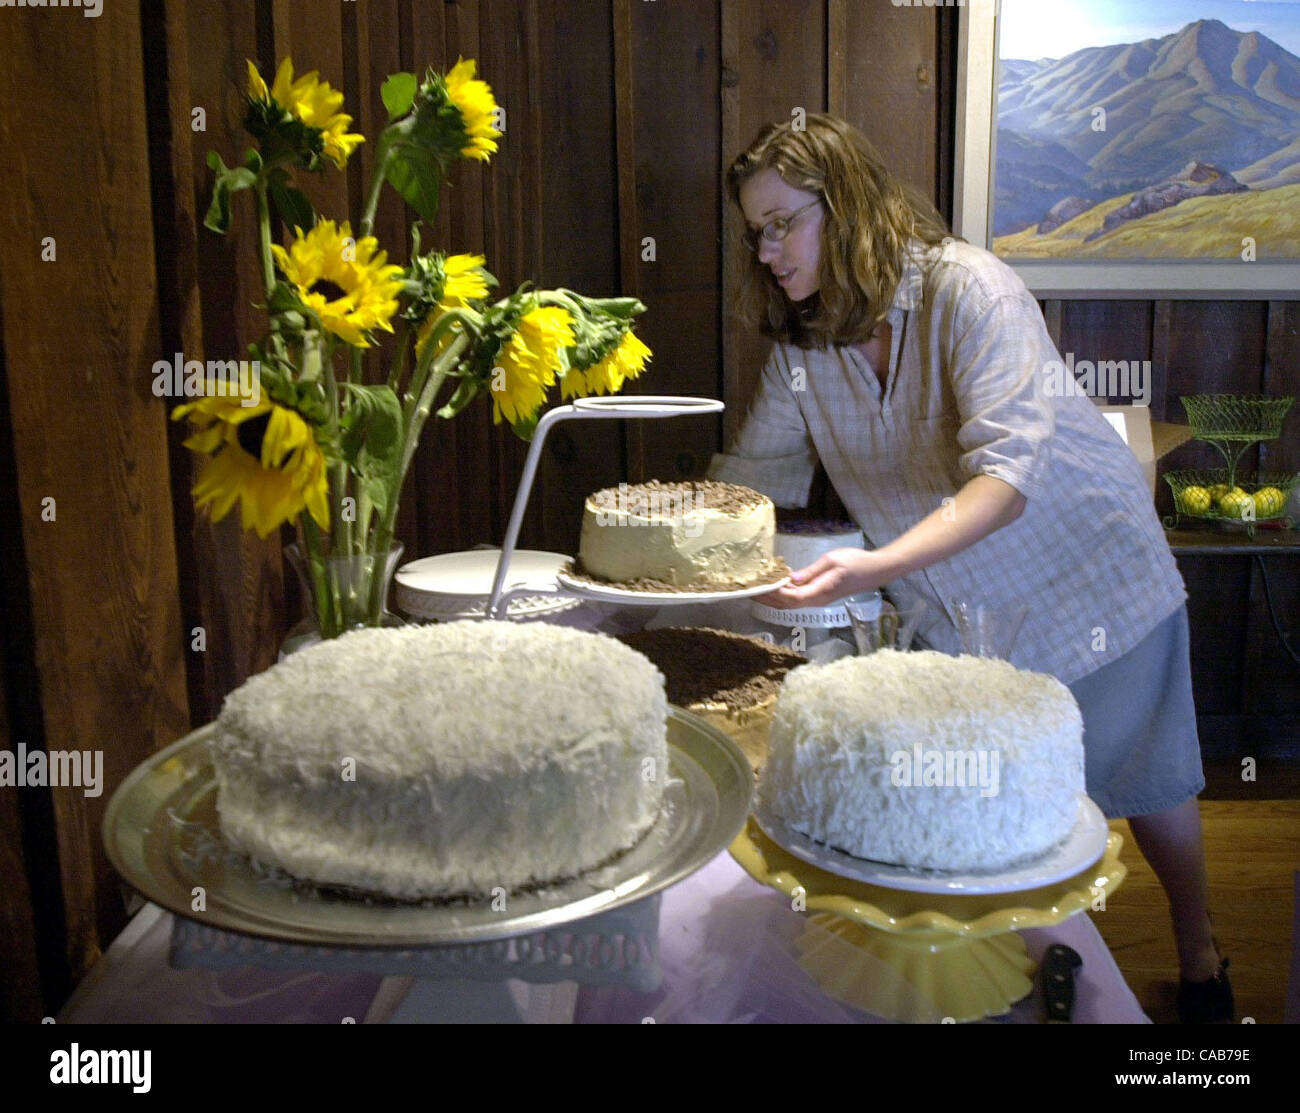 Eileen Kilmartin puts her three homemade wedding cakes out on a dessert table before her wedding in Mill Valley, Calif., on Sunday, May 09, 2004. (CONTRA COSTA TIMES/EDDIE LEDESMA) Stock Photo